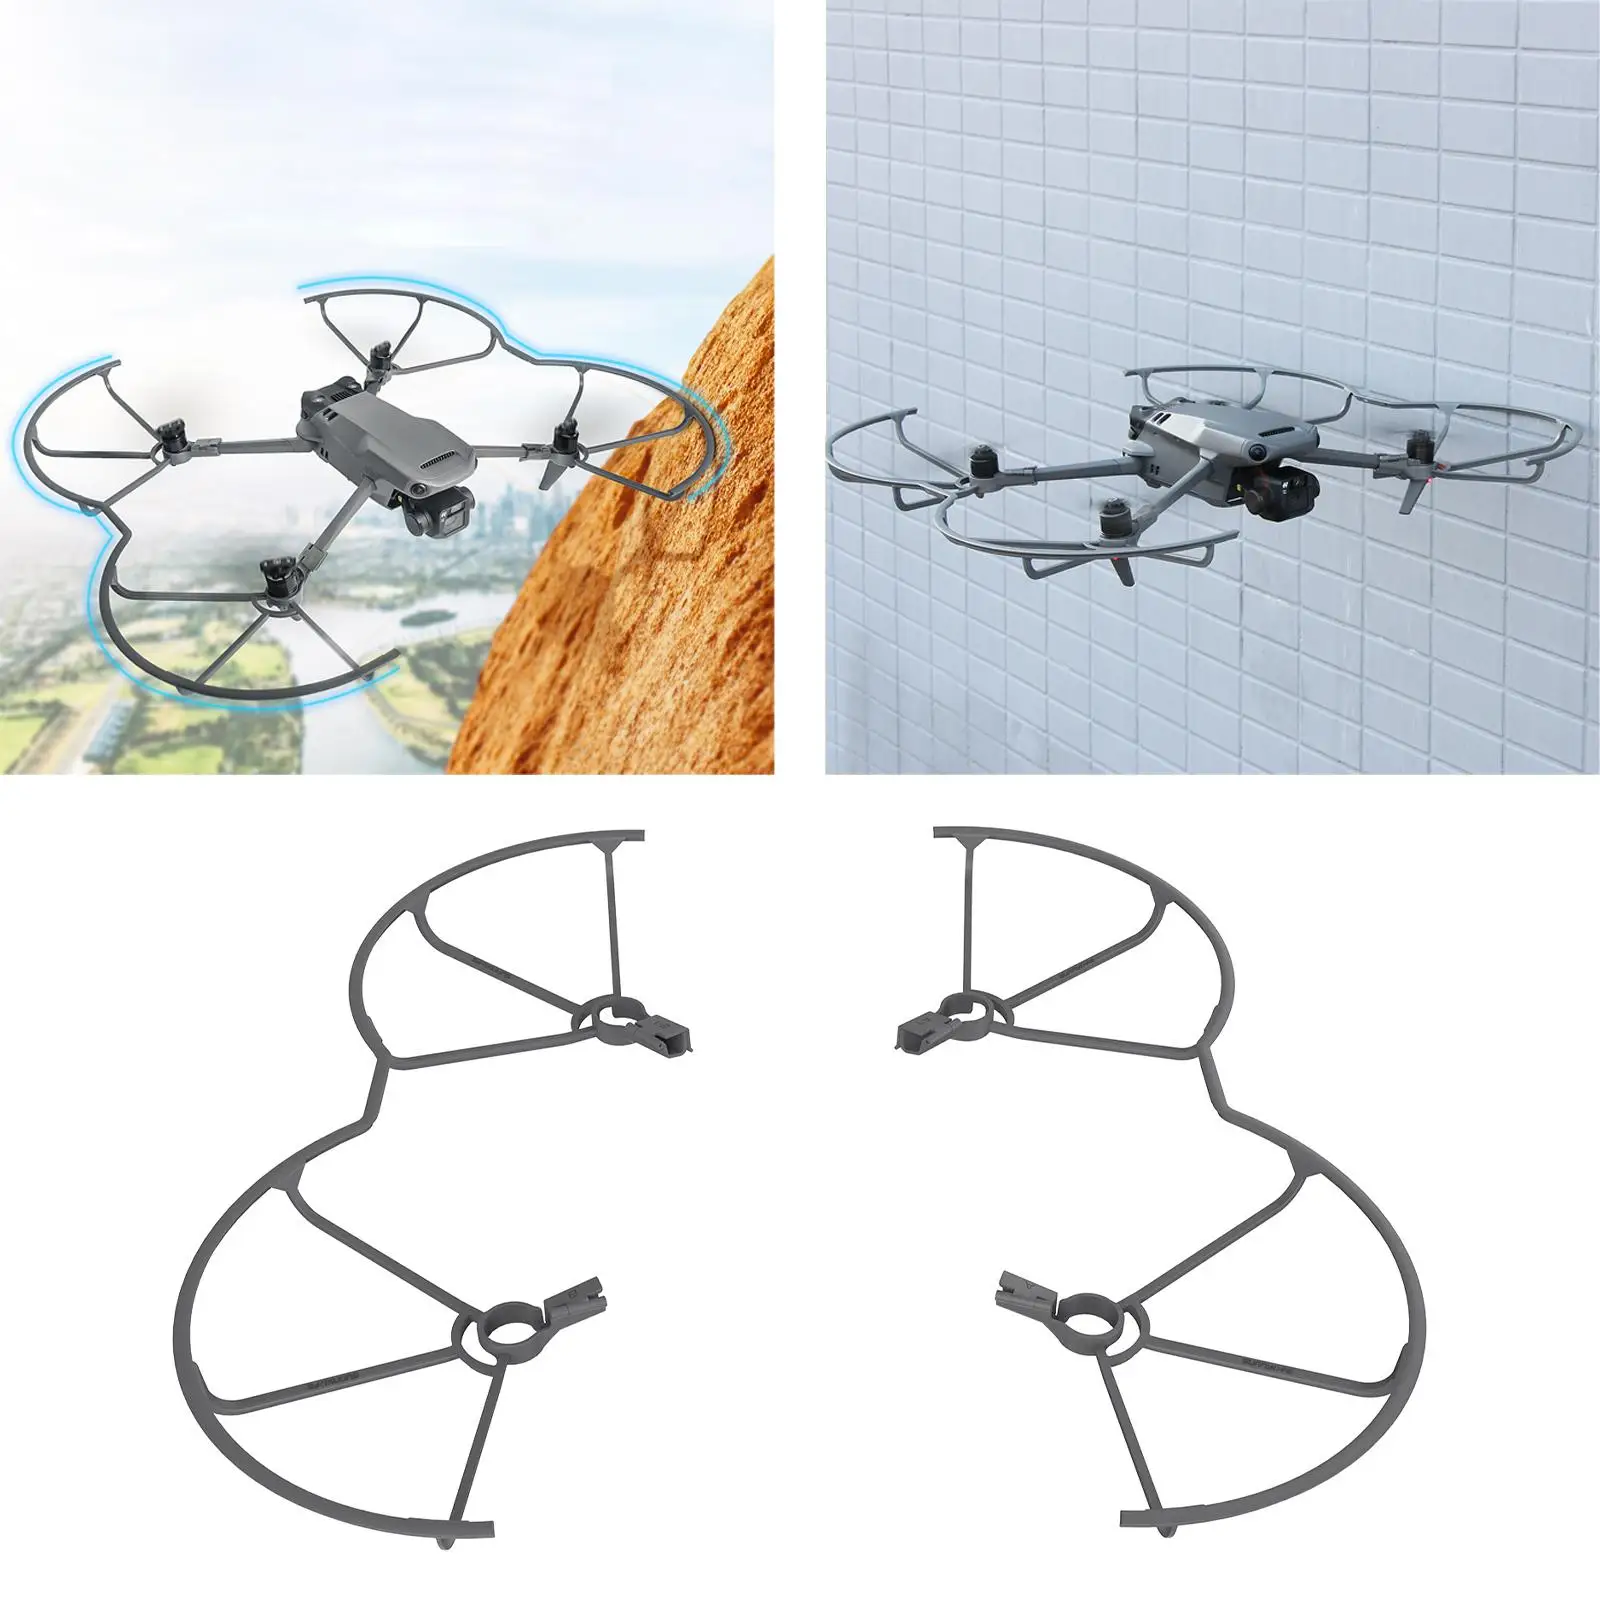 2x Propeller Guard ,Protective , Blade Mount Bumper Cover, Anti- Cage Cover Anti-Collision ,for DJI 3